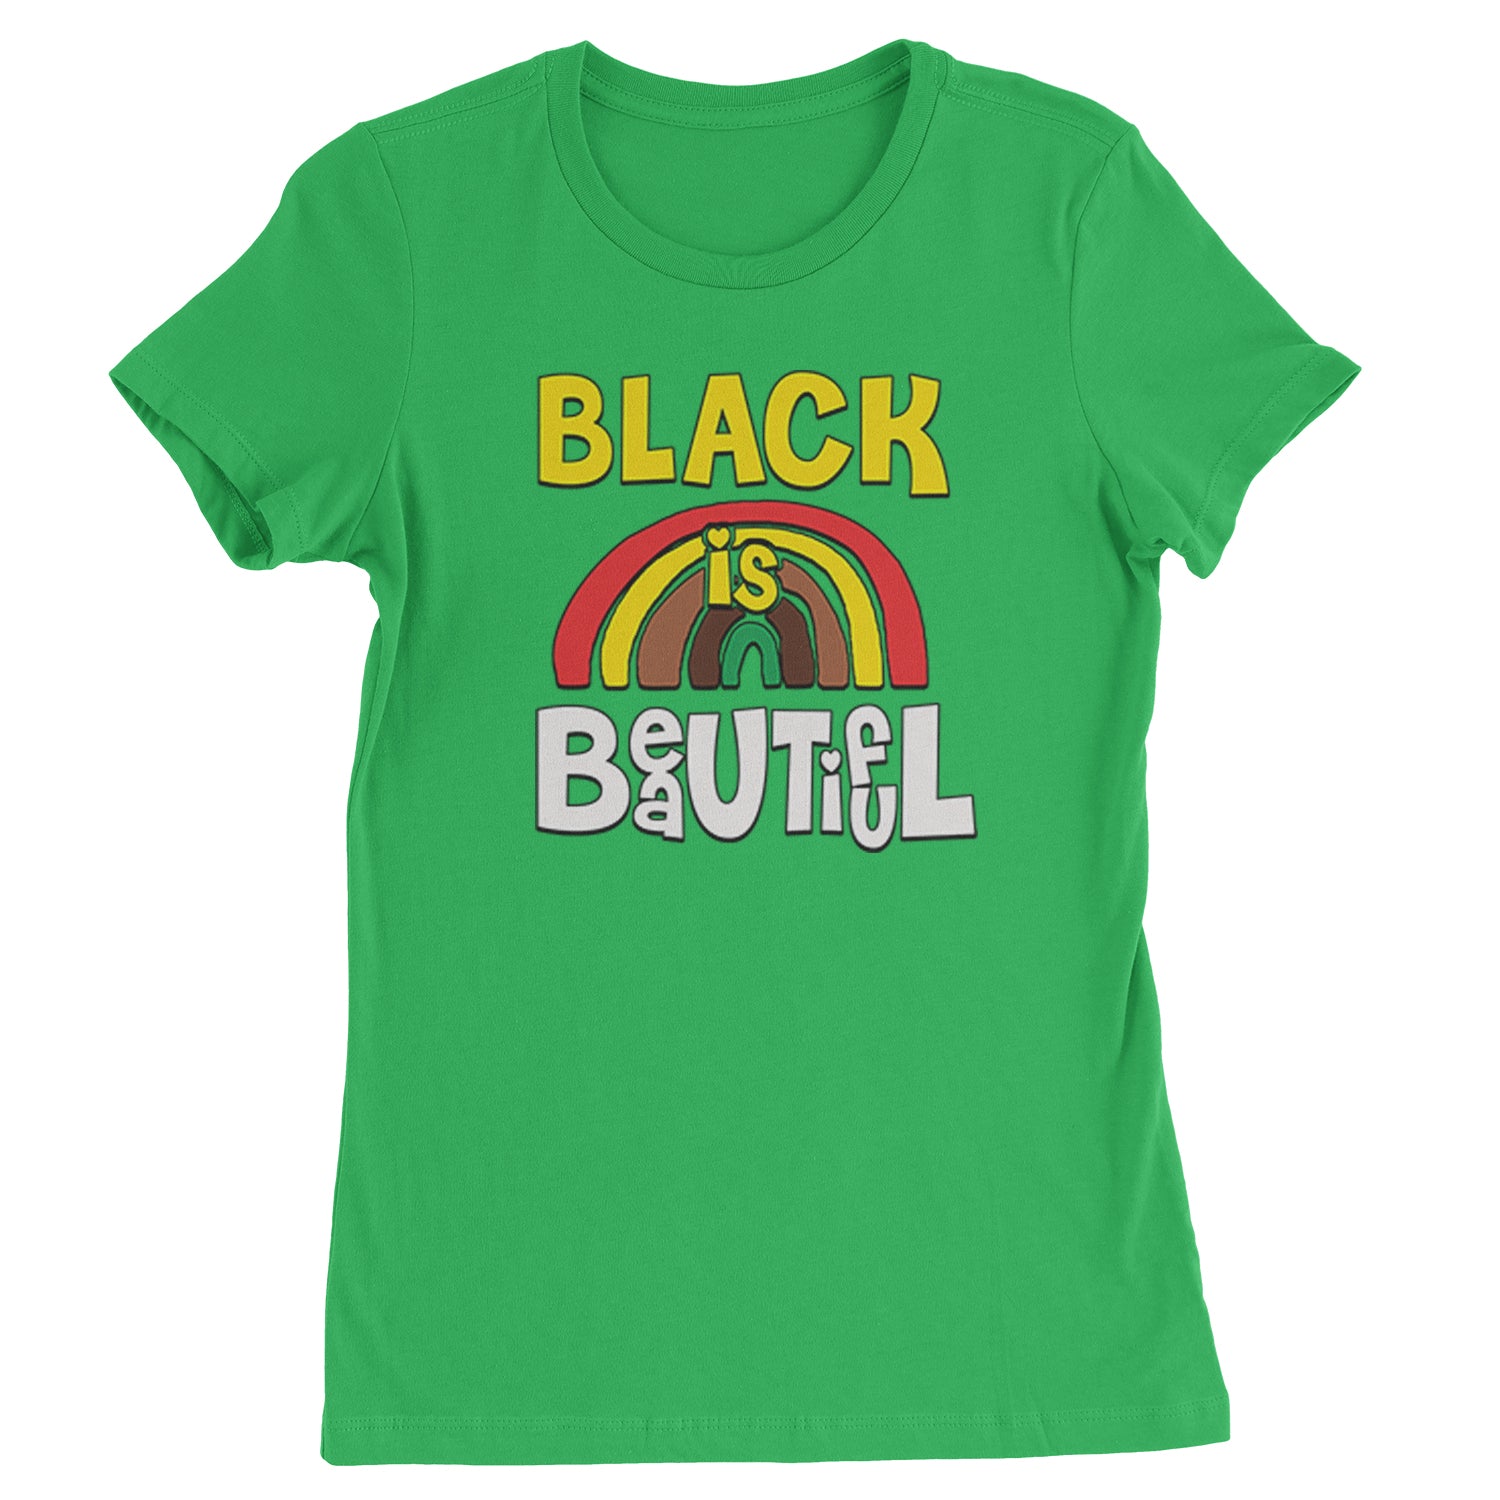 Black Is Beautiful Rainbow Womens T-shirt african, africanamerican, american, black, blackpride, blm, harriet, king, lives, luther, malcolm, march, martin, matter, parks, protest, rosa, tubman, x by Expression Tees